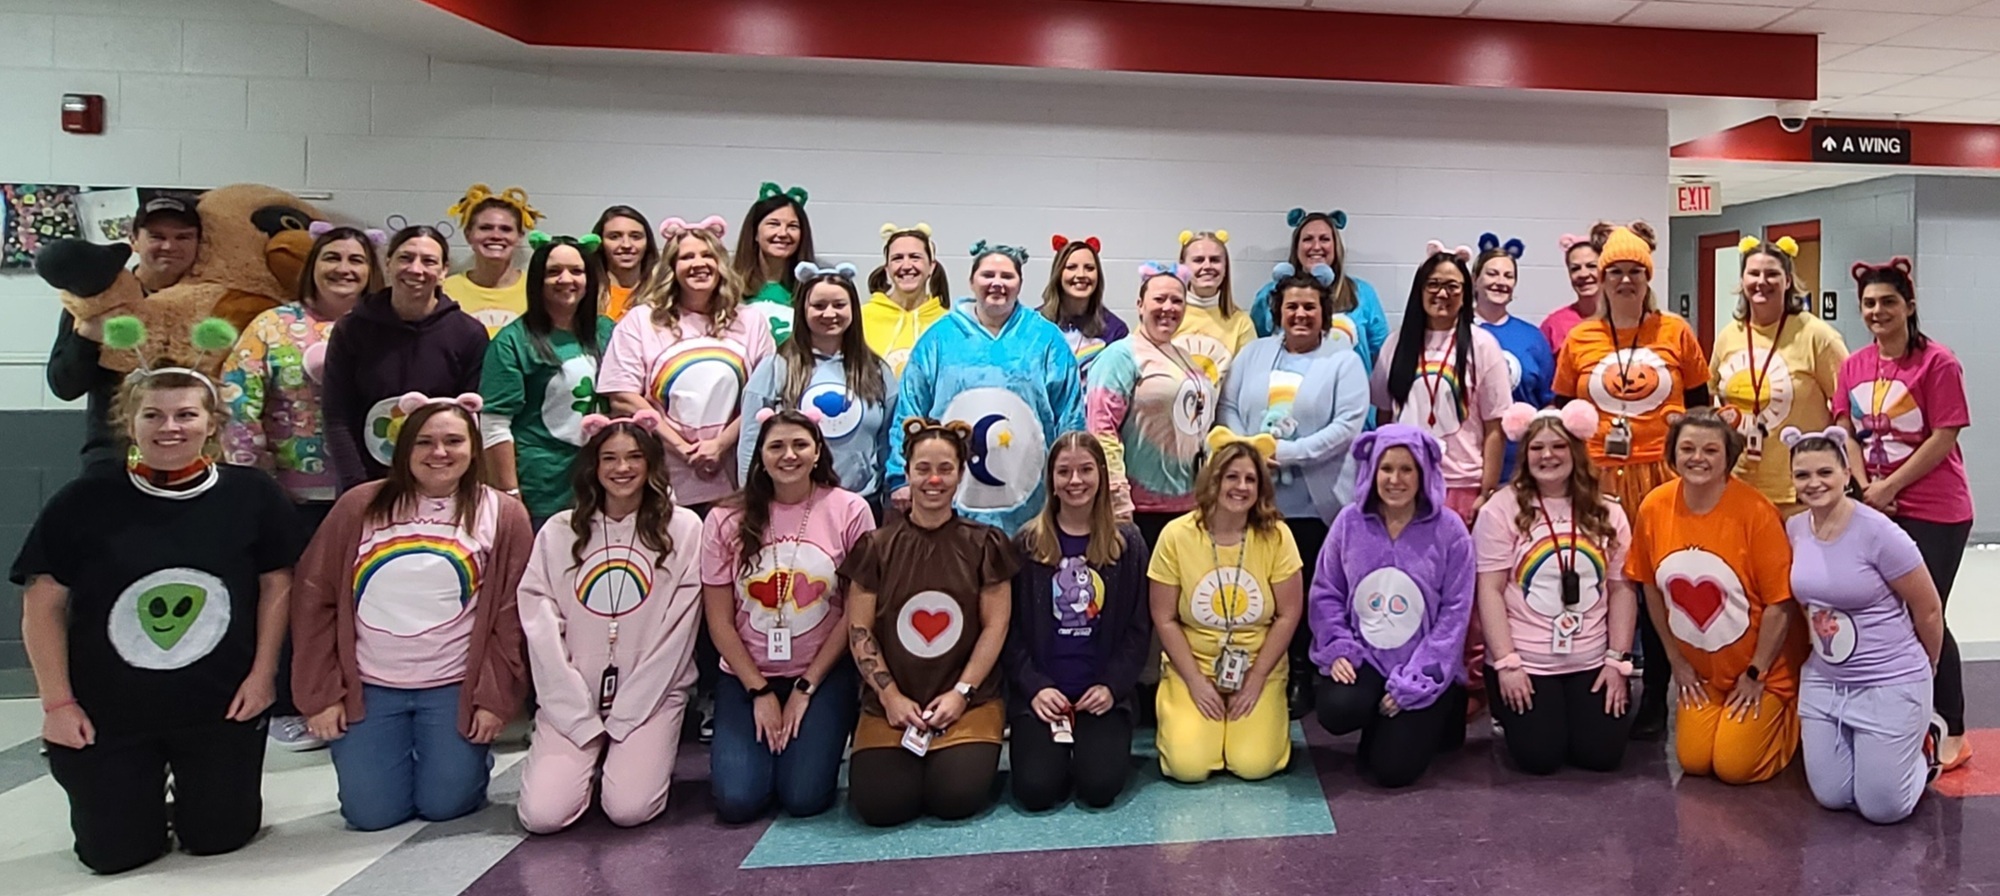 DEL Staff for Halloween in CareBear costumes